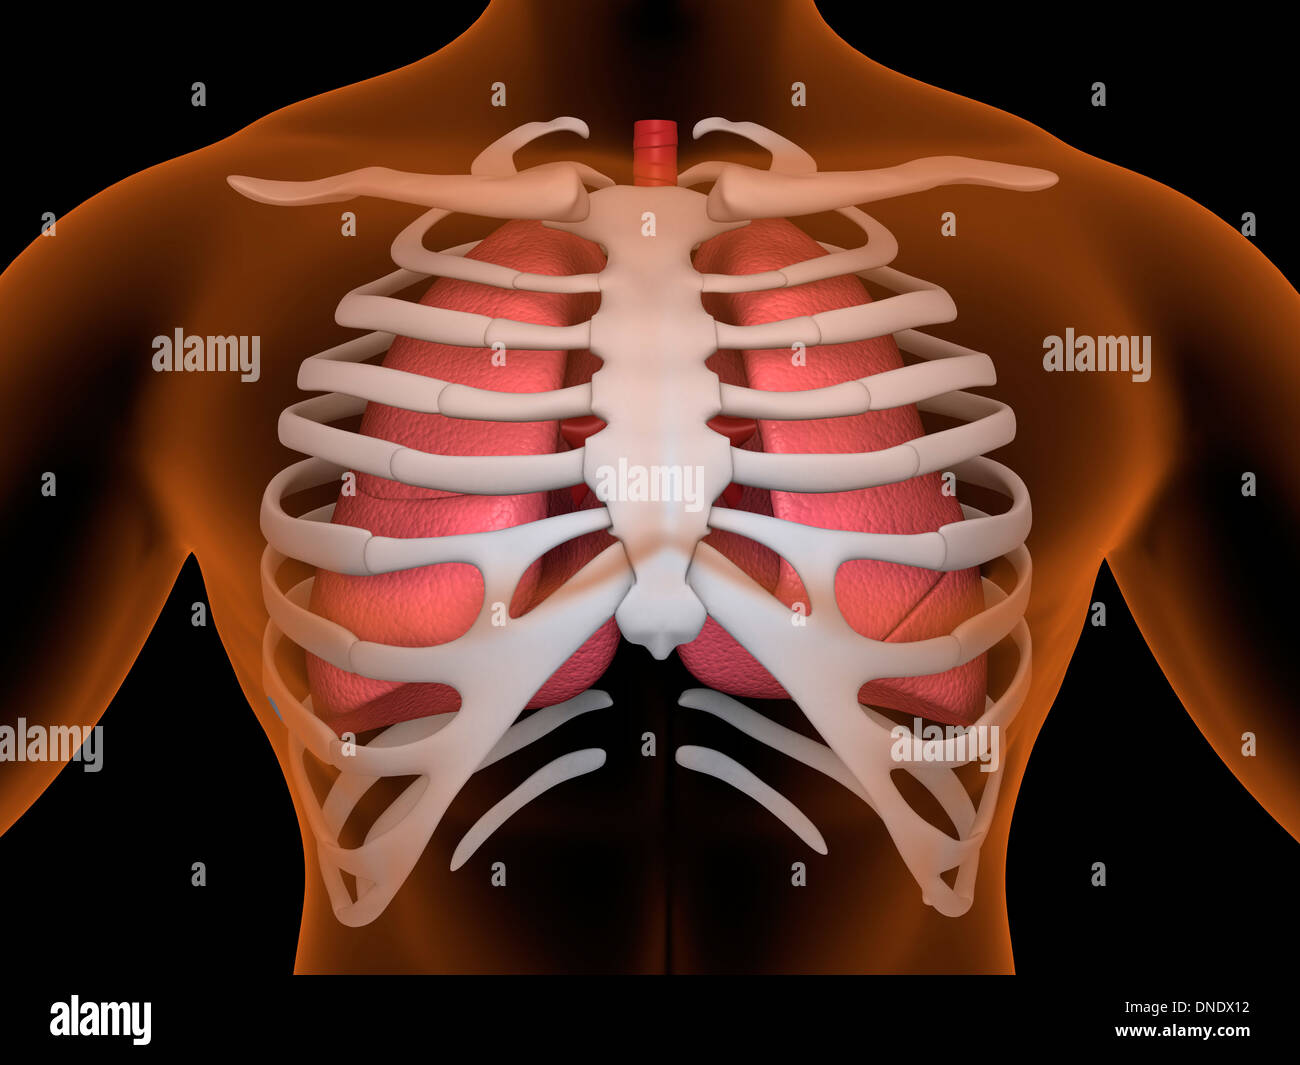 Conceptual image of human lungs and rib cage. Stock Photo